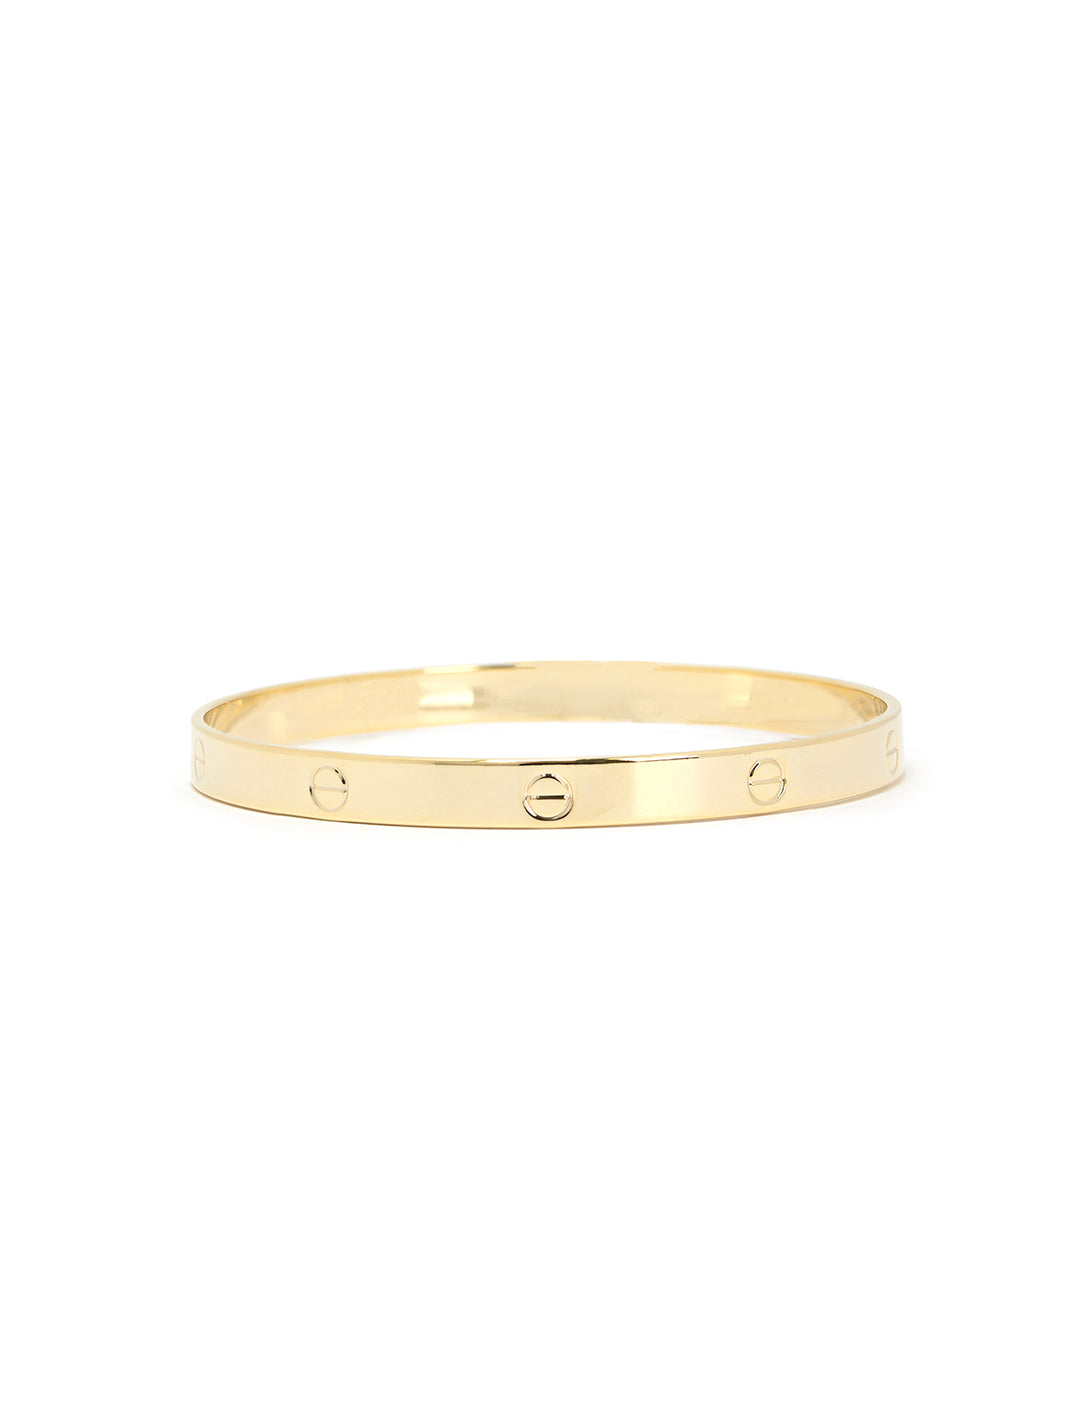 Front view of AV Max gold screw accent bangle